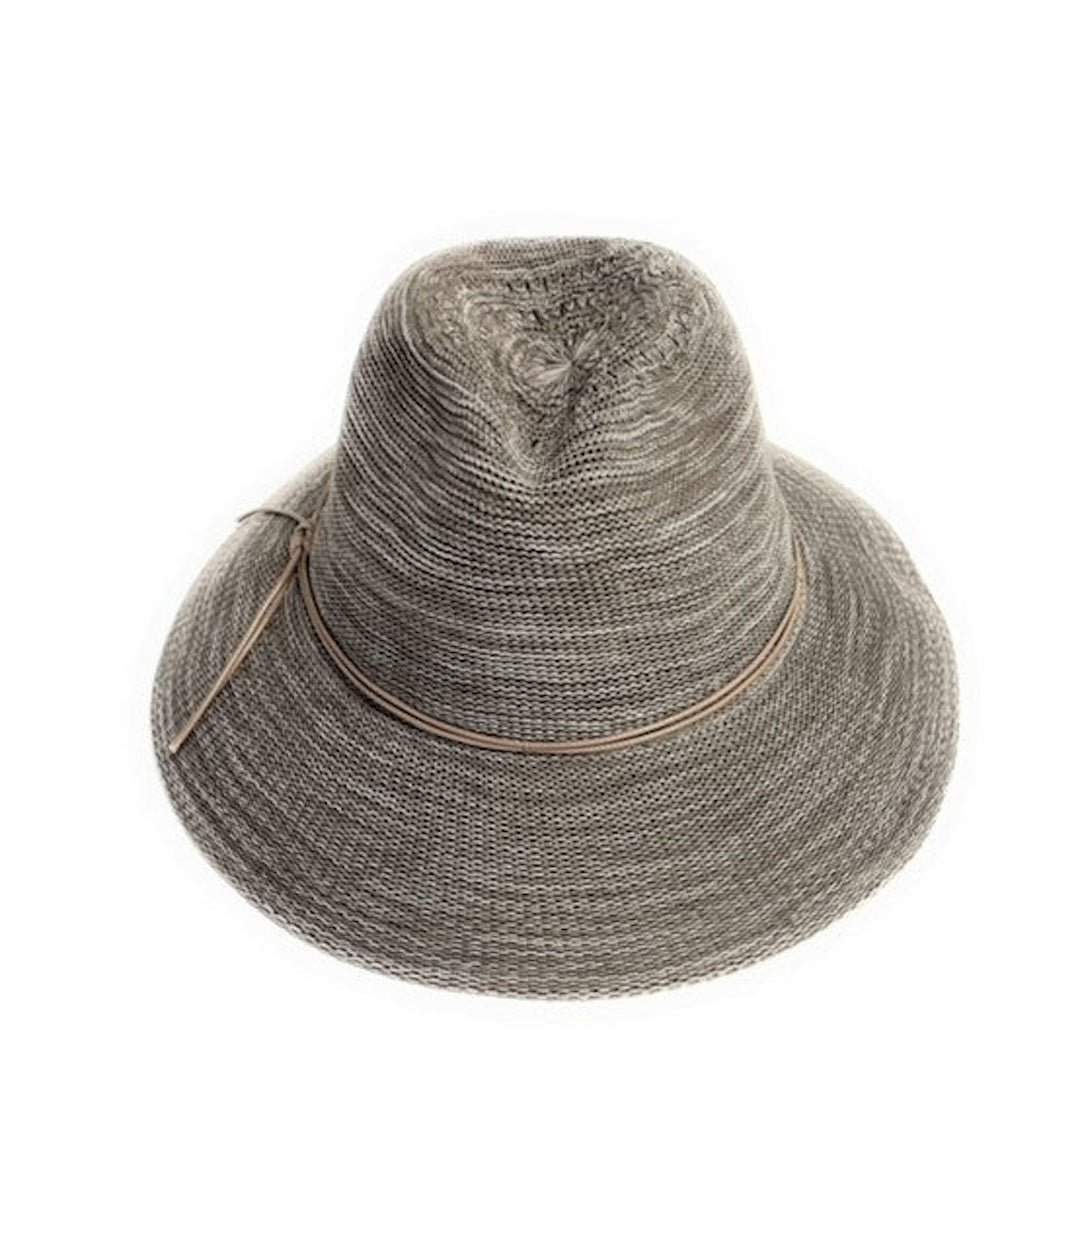 A taupe wide brim hat with a thin vegan leather band.